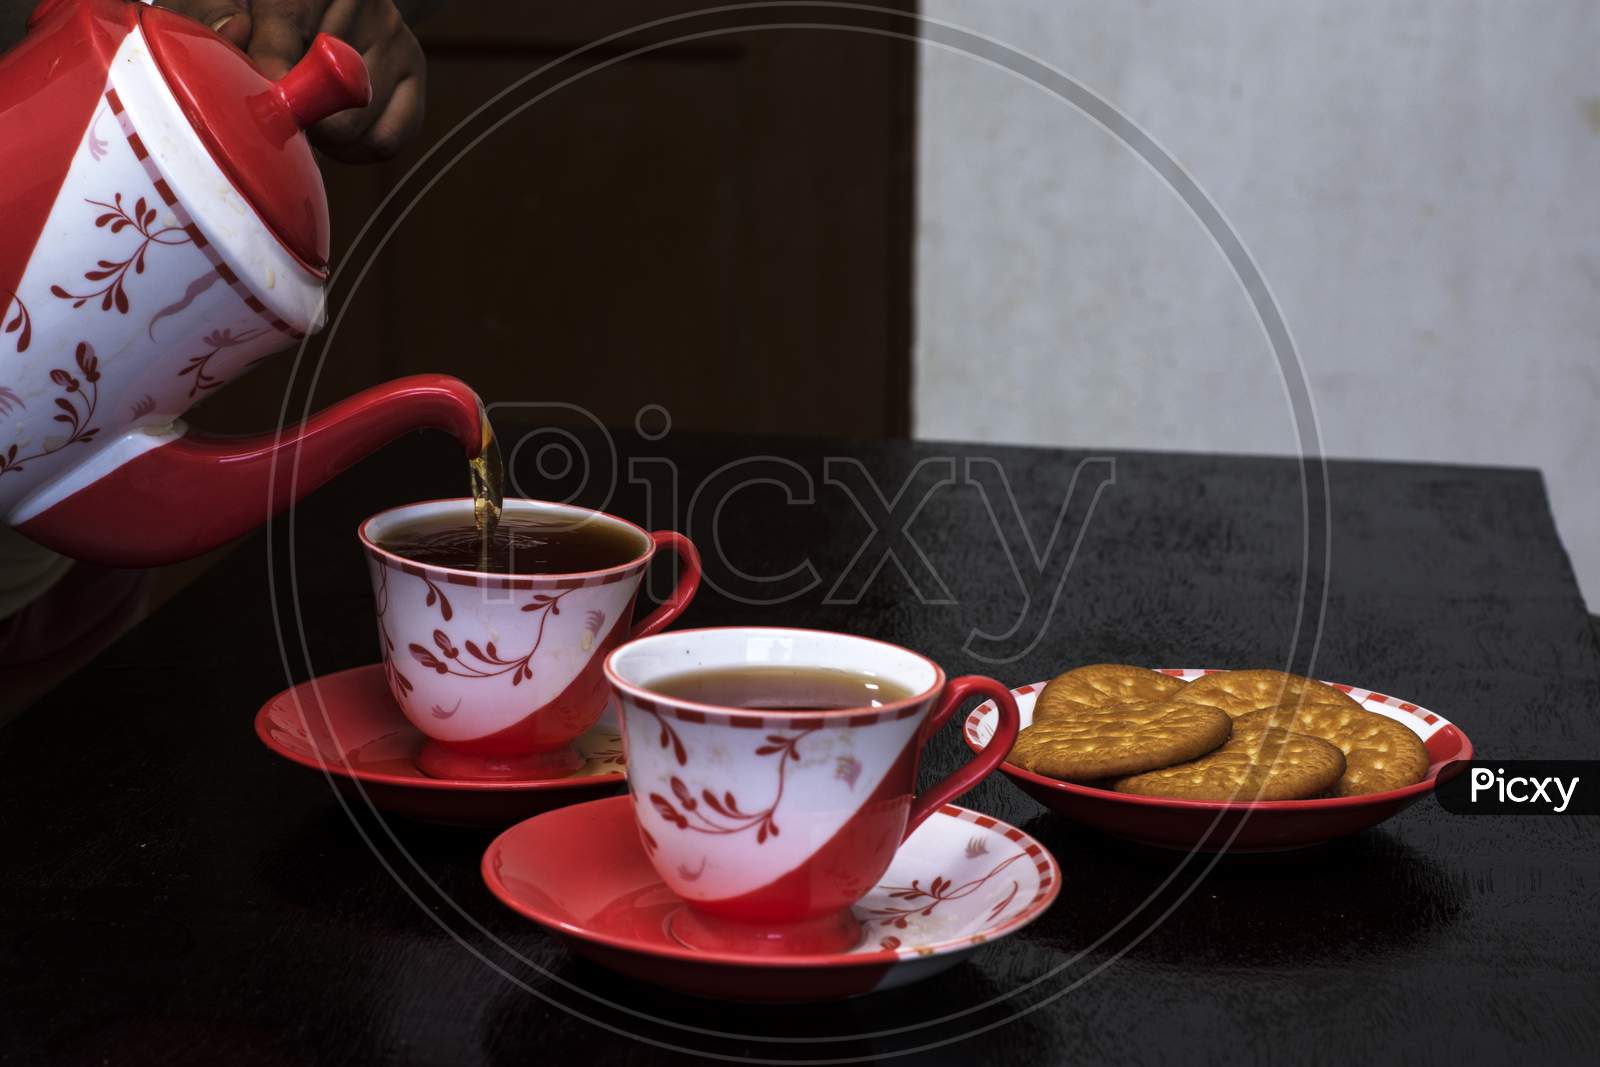 Pouring Tea Into Ceramic Cup On A Wooden Table With Some Biscuit On Plate.